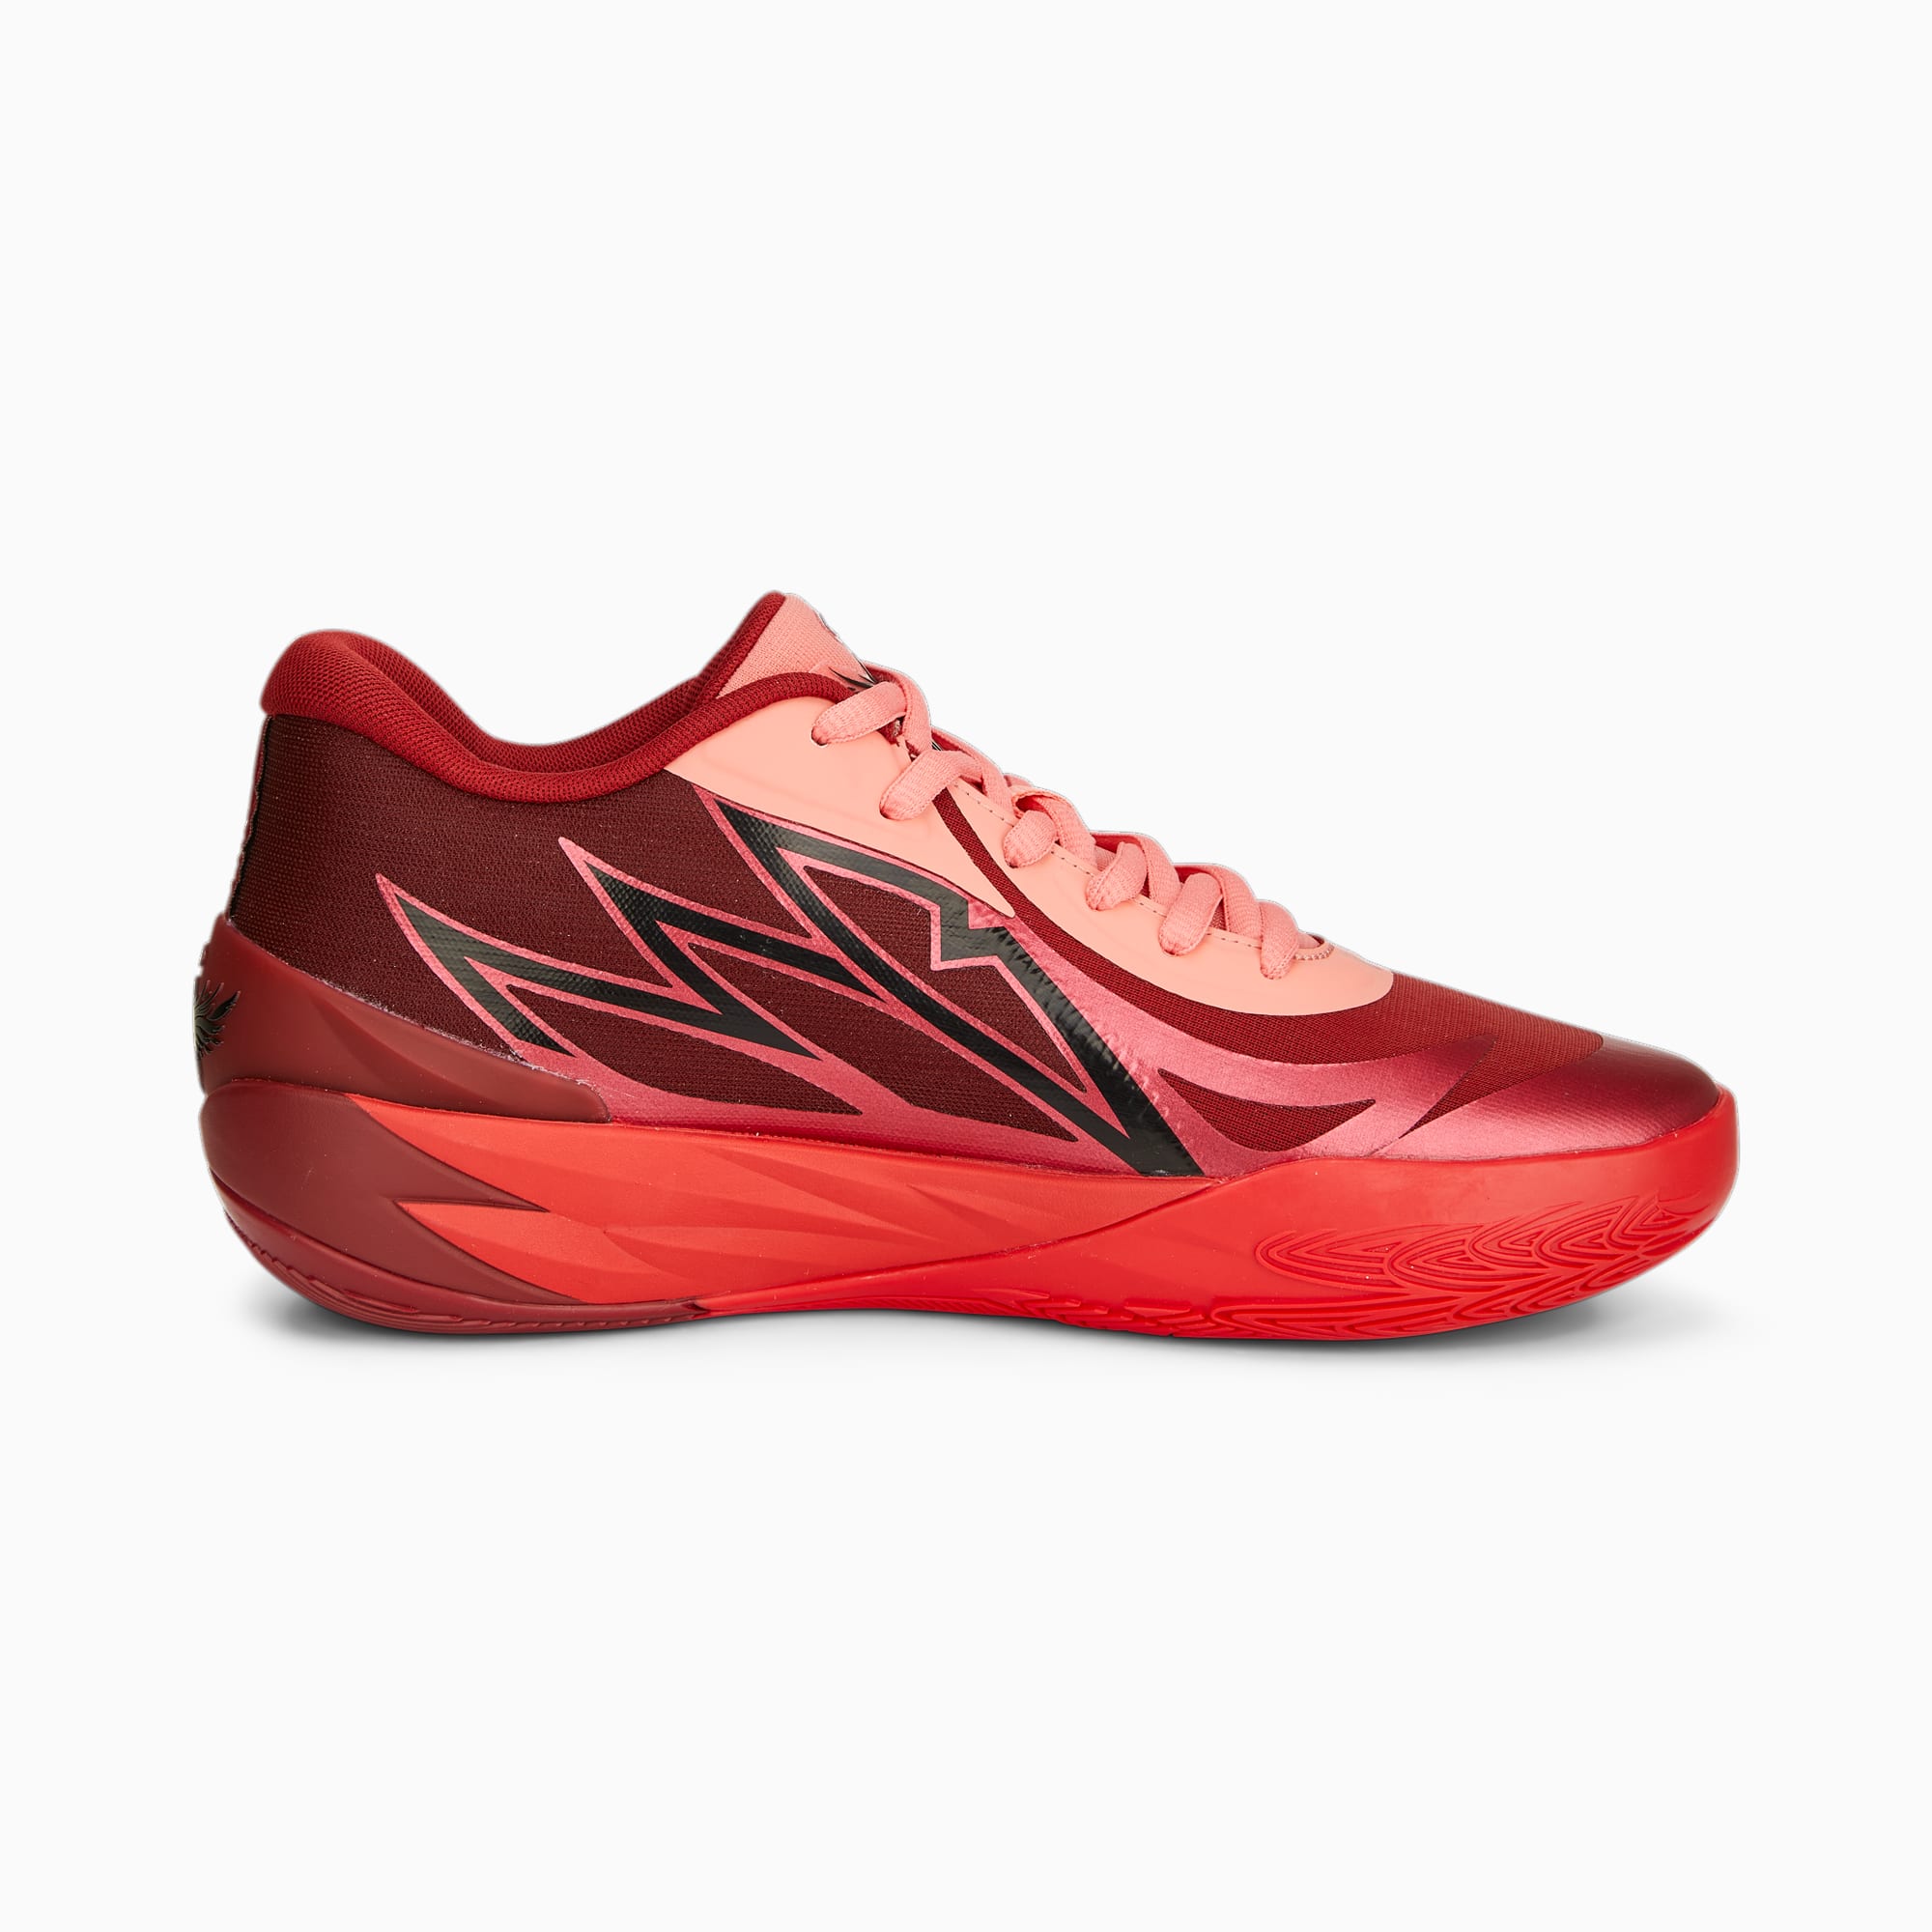 Men's PUMA Mb.02 Lo Basketball Shoe Sneakers, Intense Red/For All Time Red